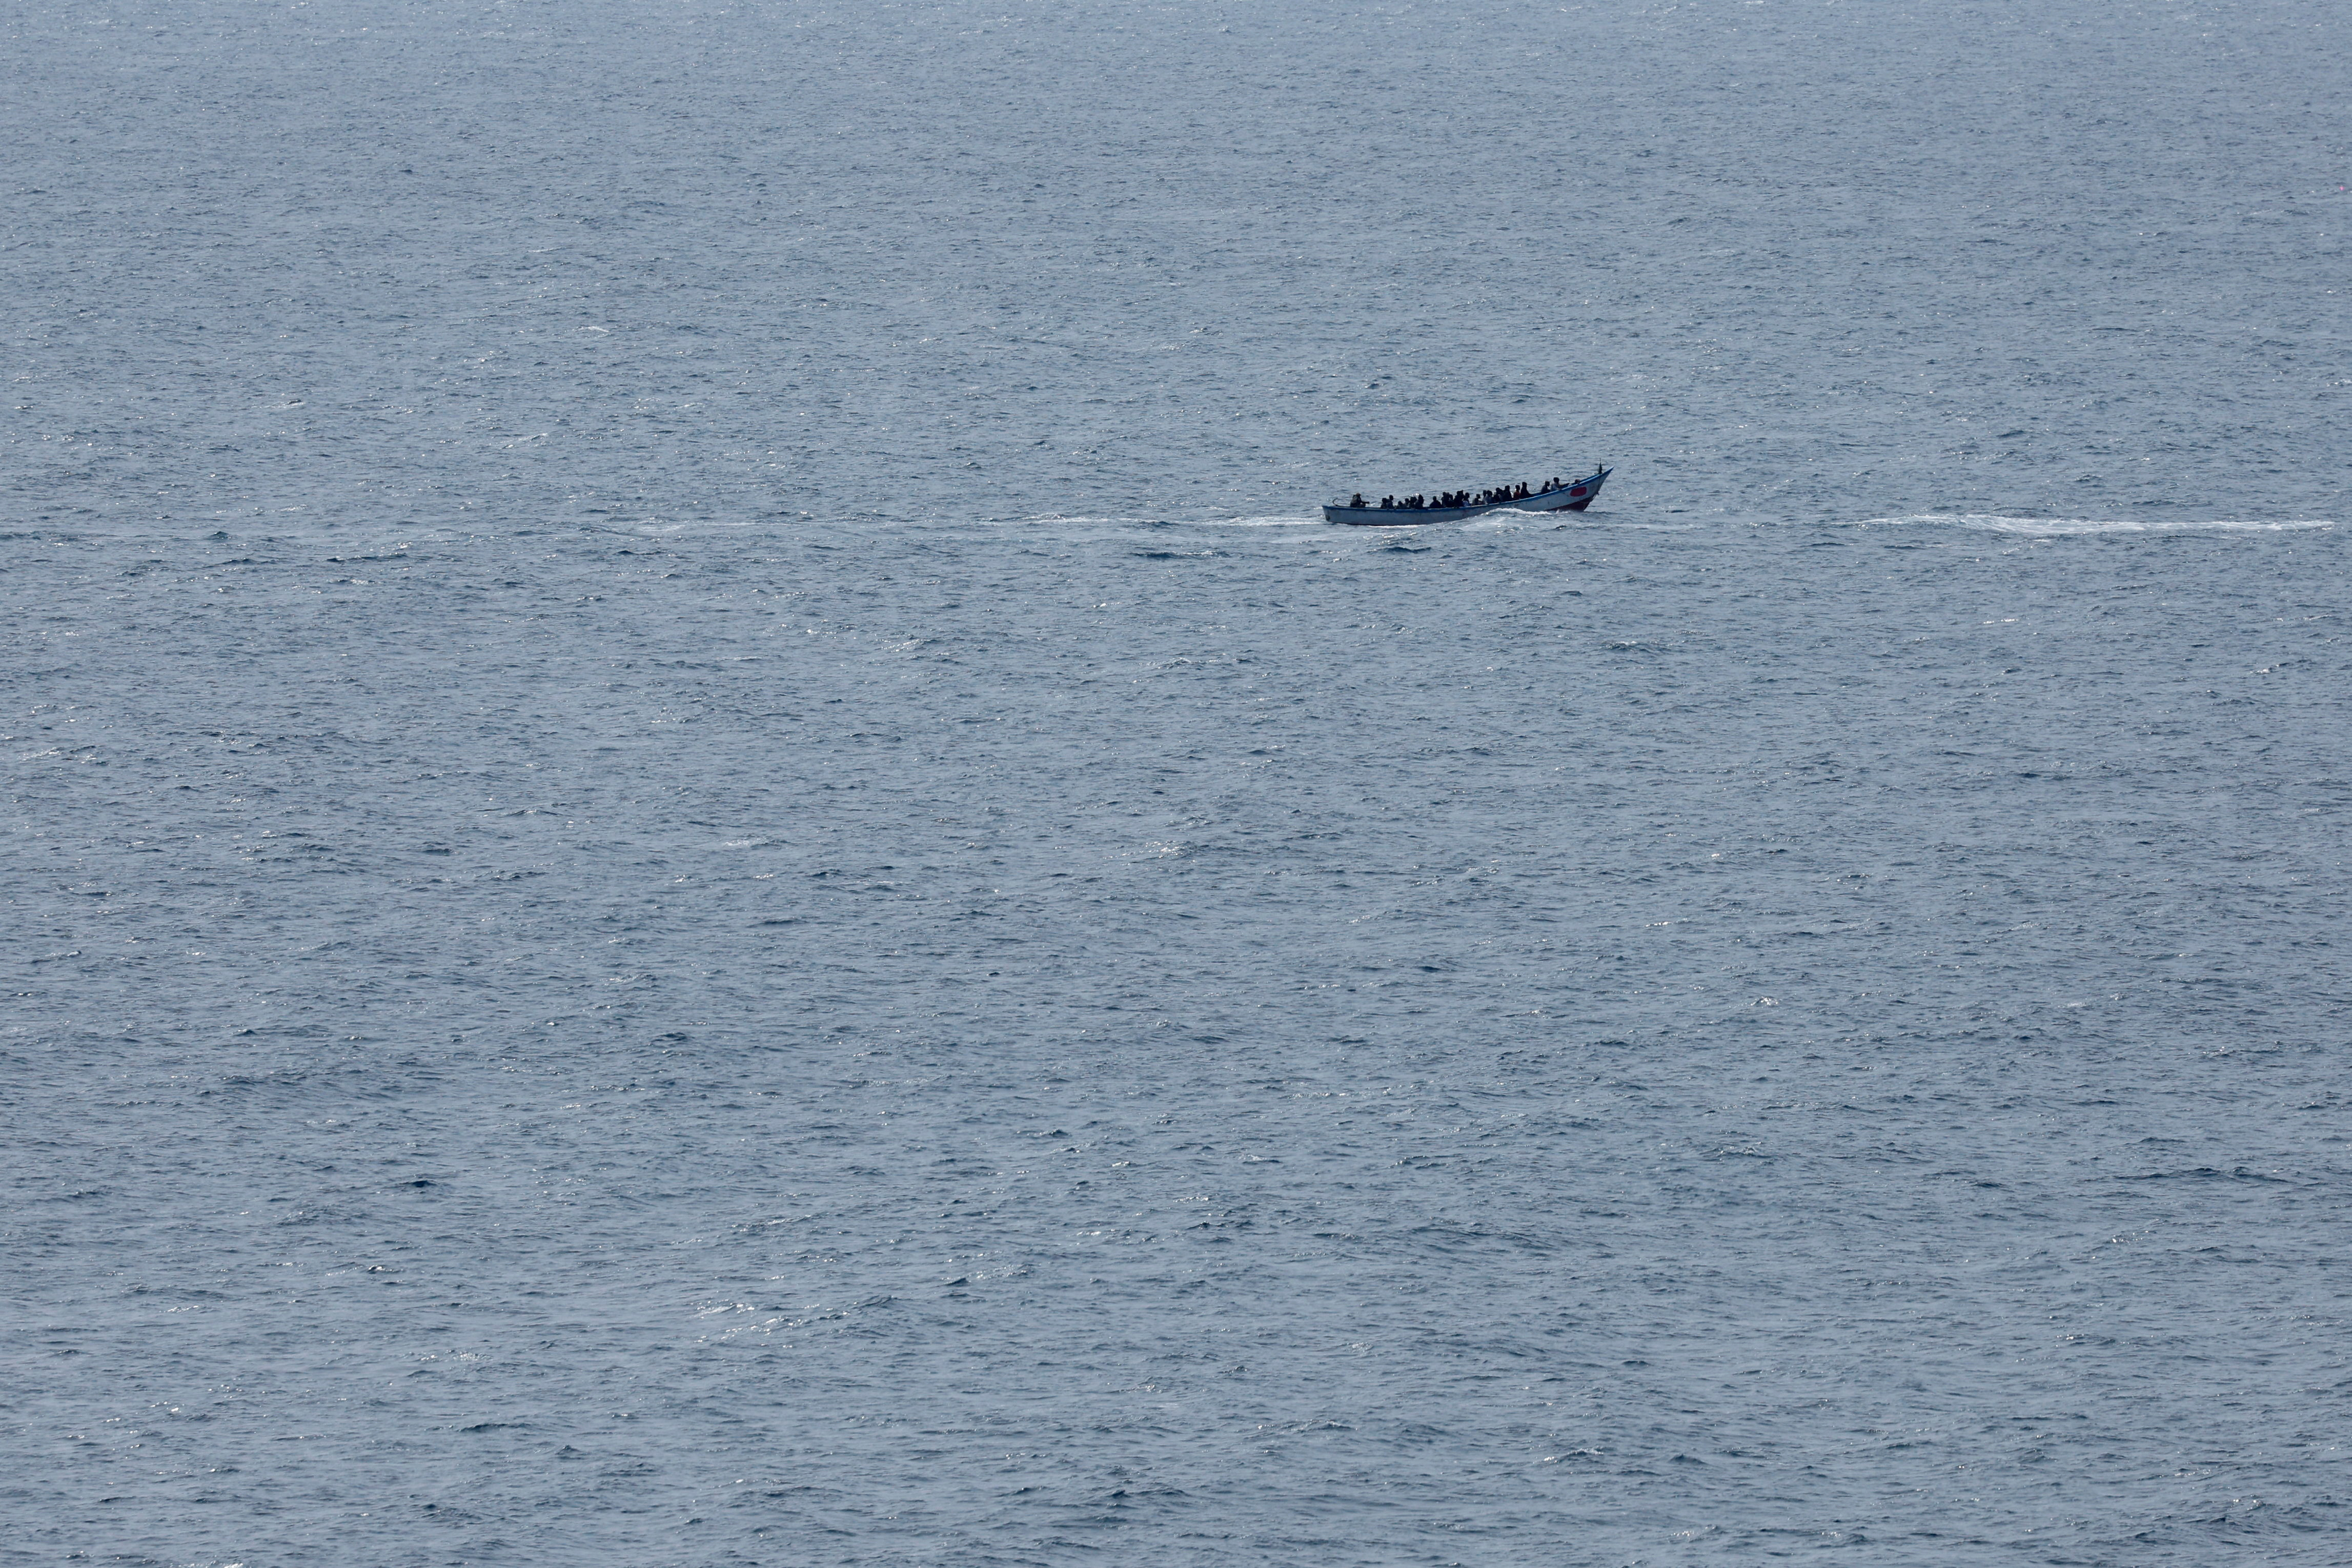 A boat with migrants sails south of the island of Gran Canaria